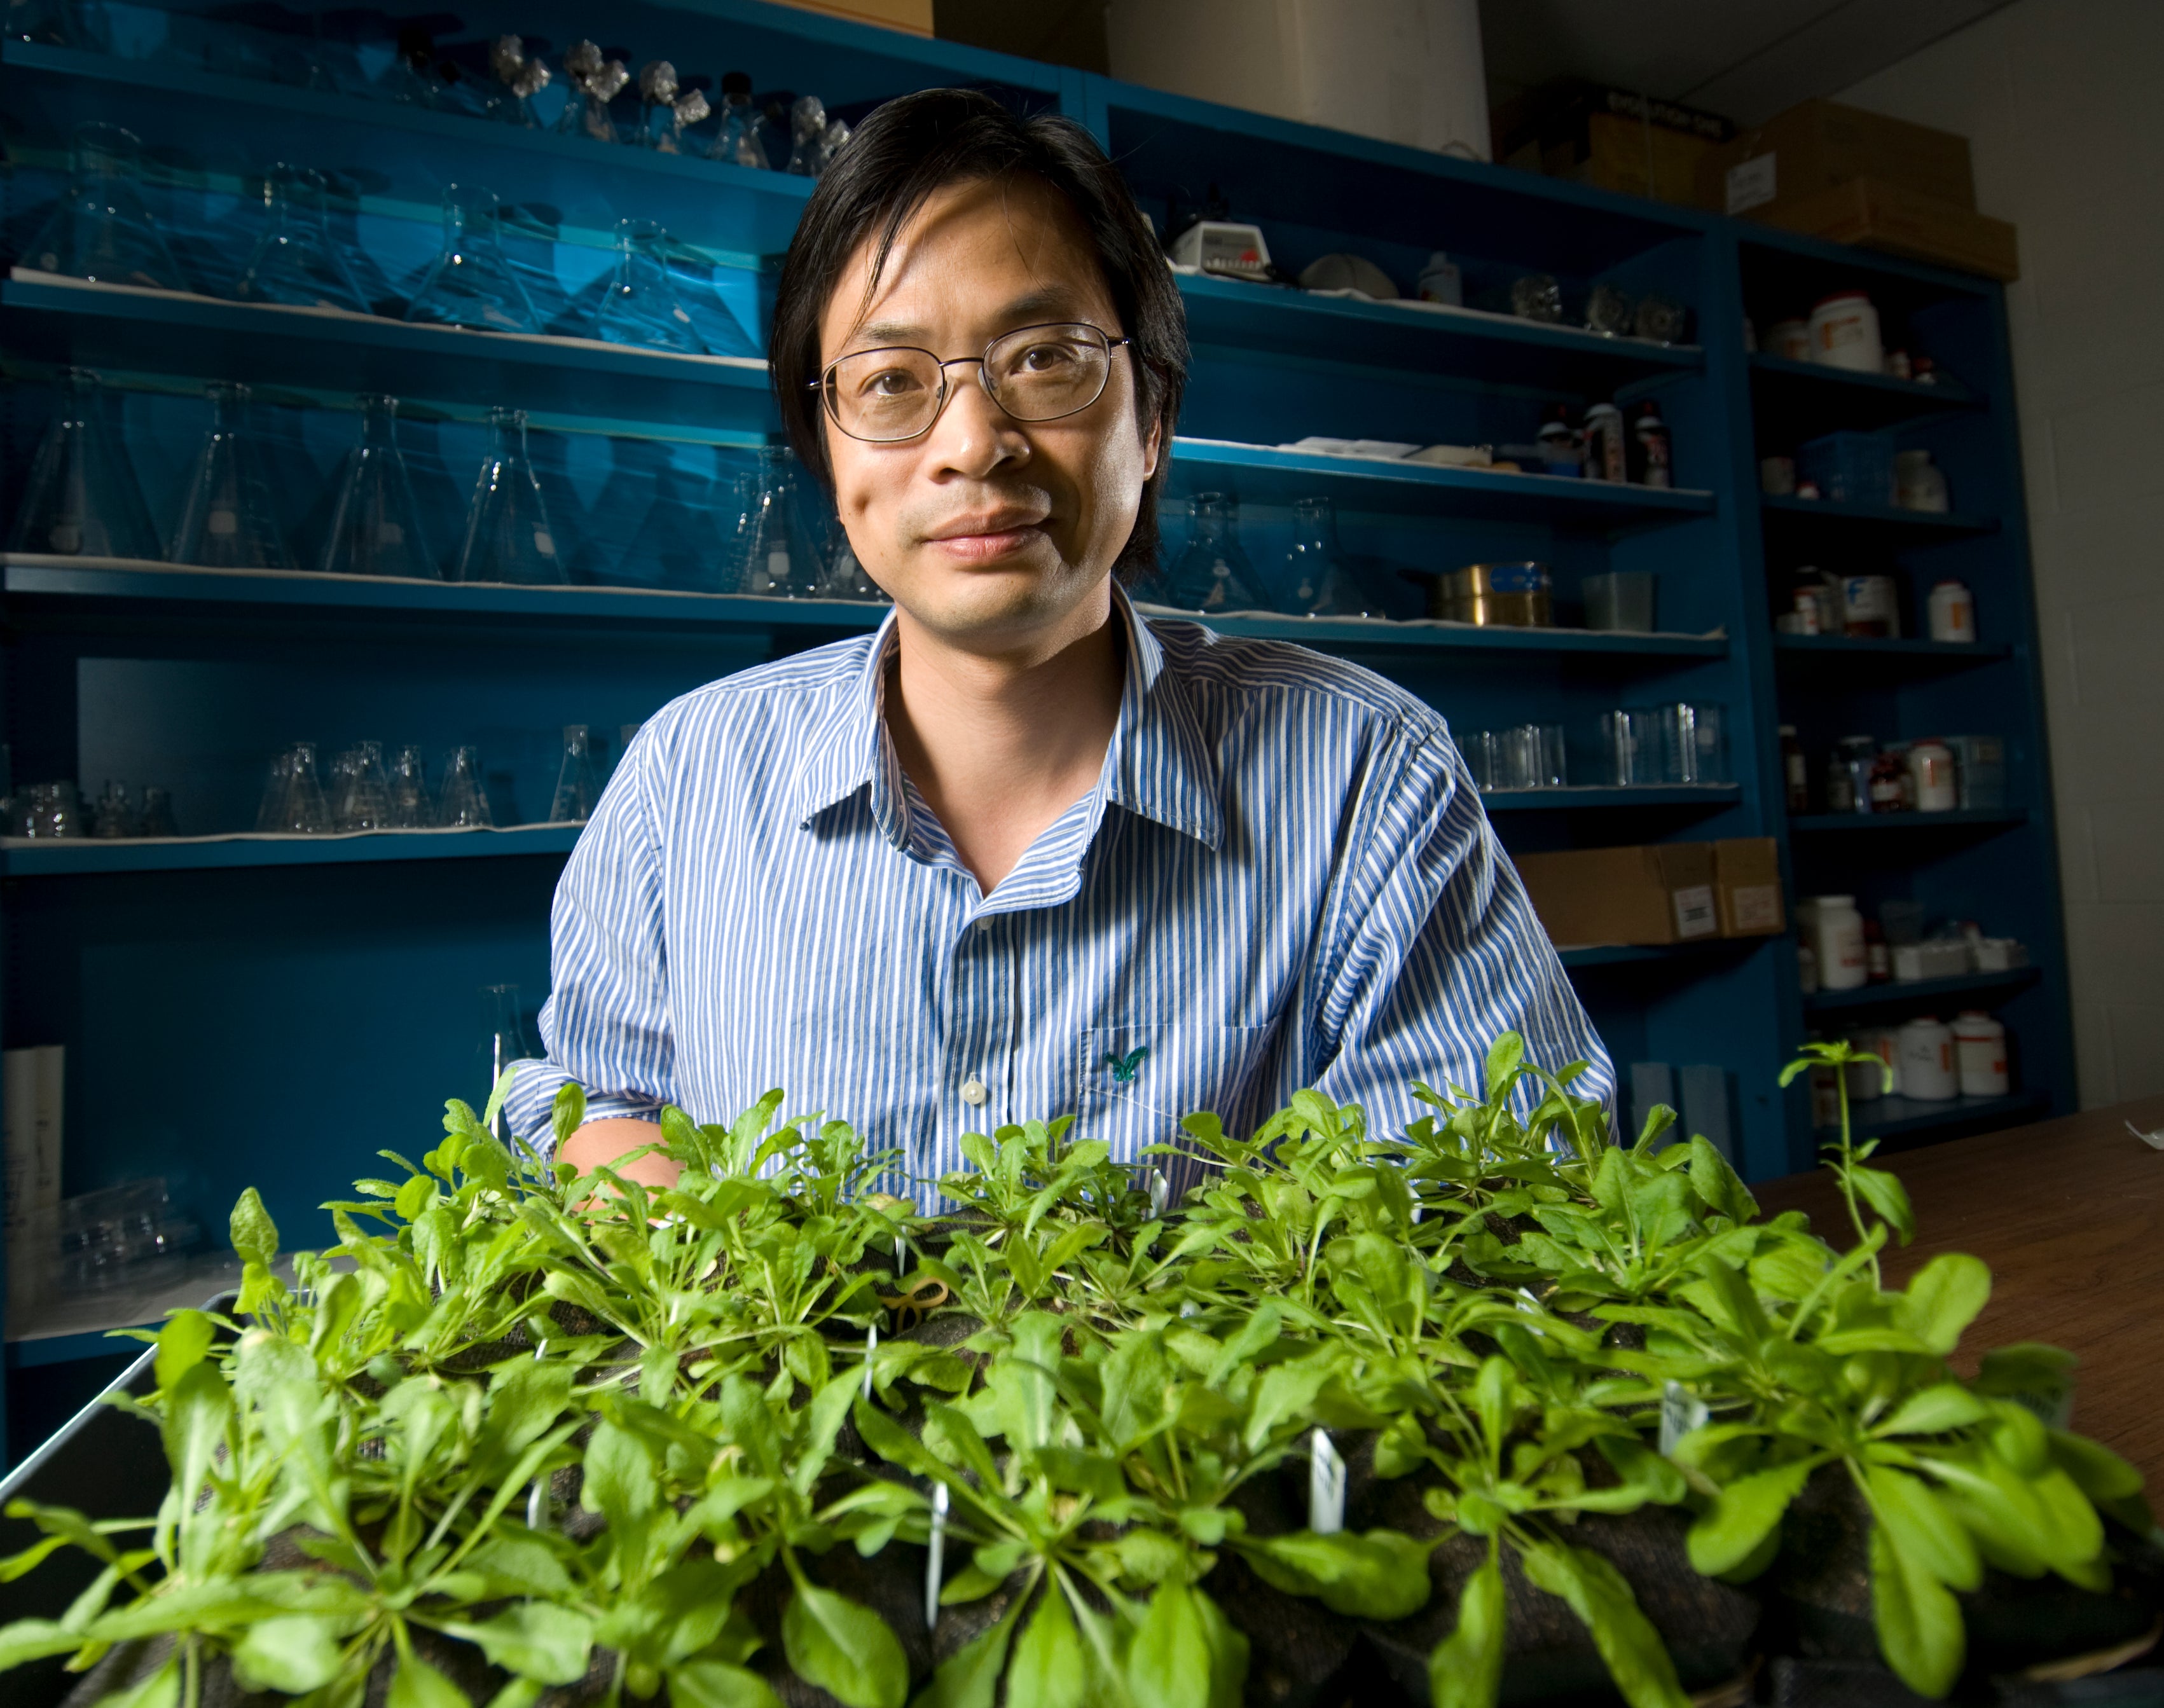 Sheng-Yang He from Duke University, who worked on the project to make thale cress more able to withstand heat pressures